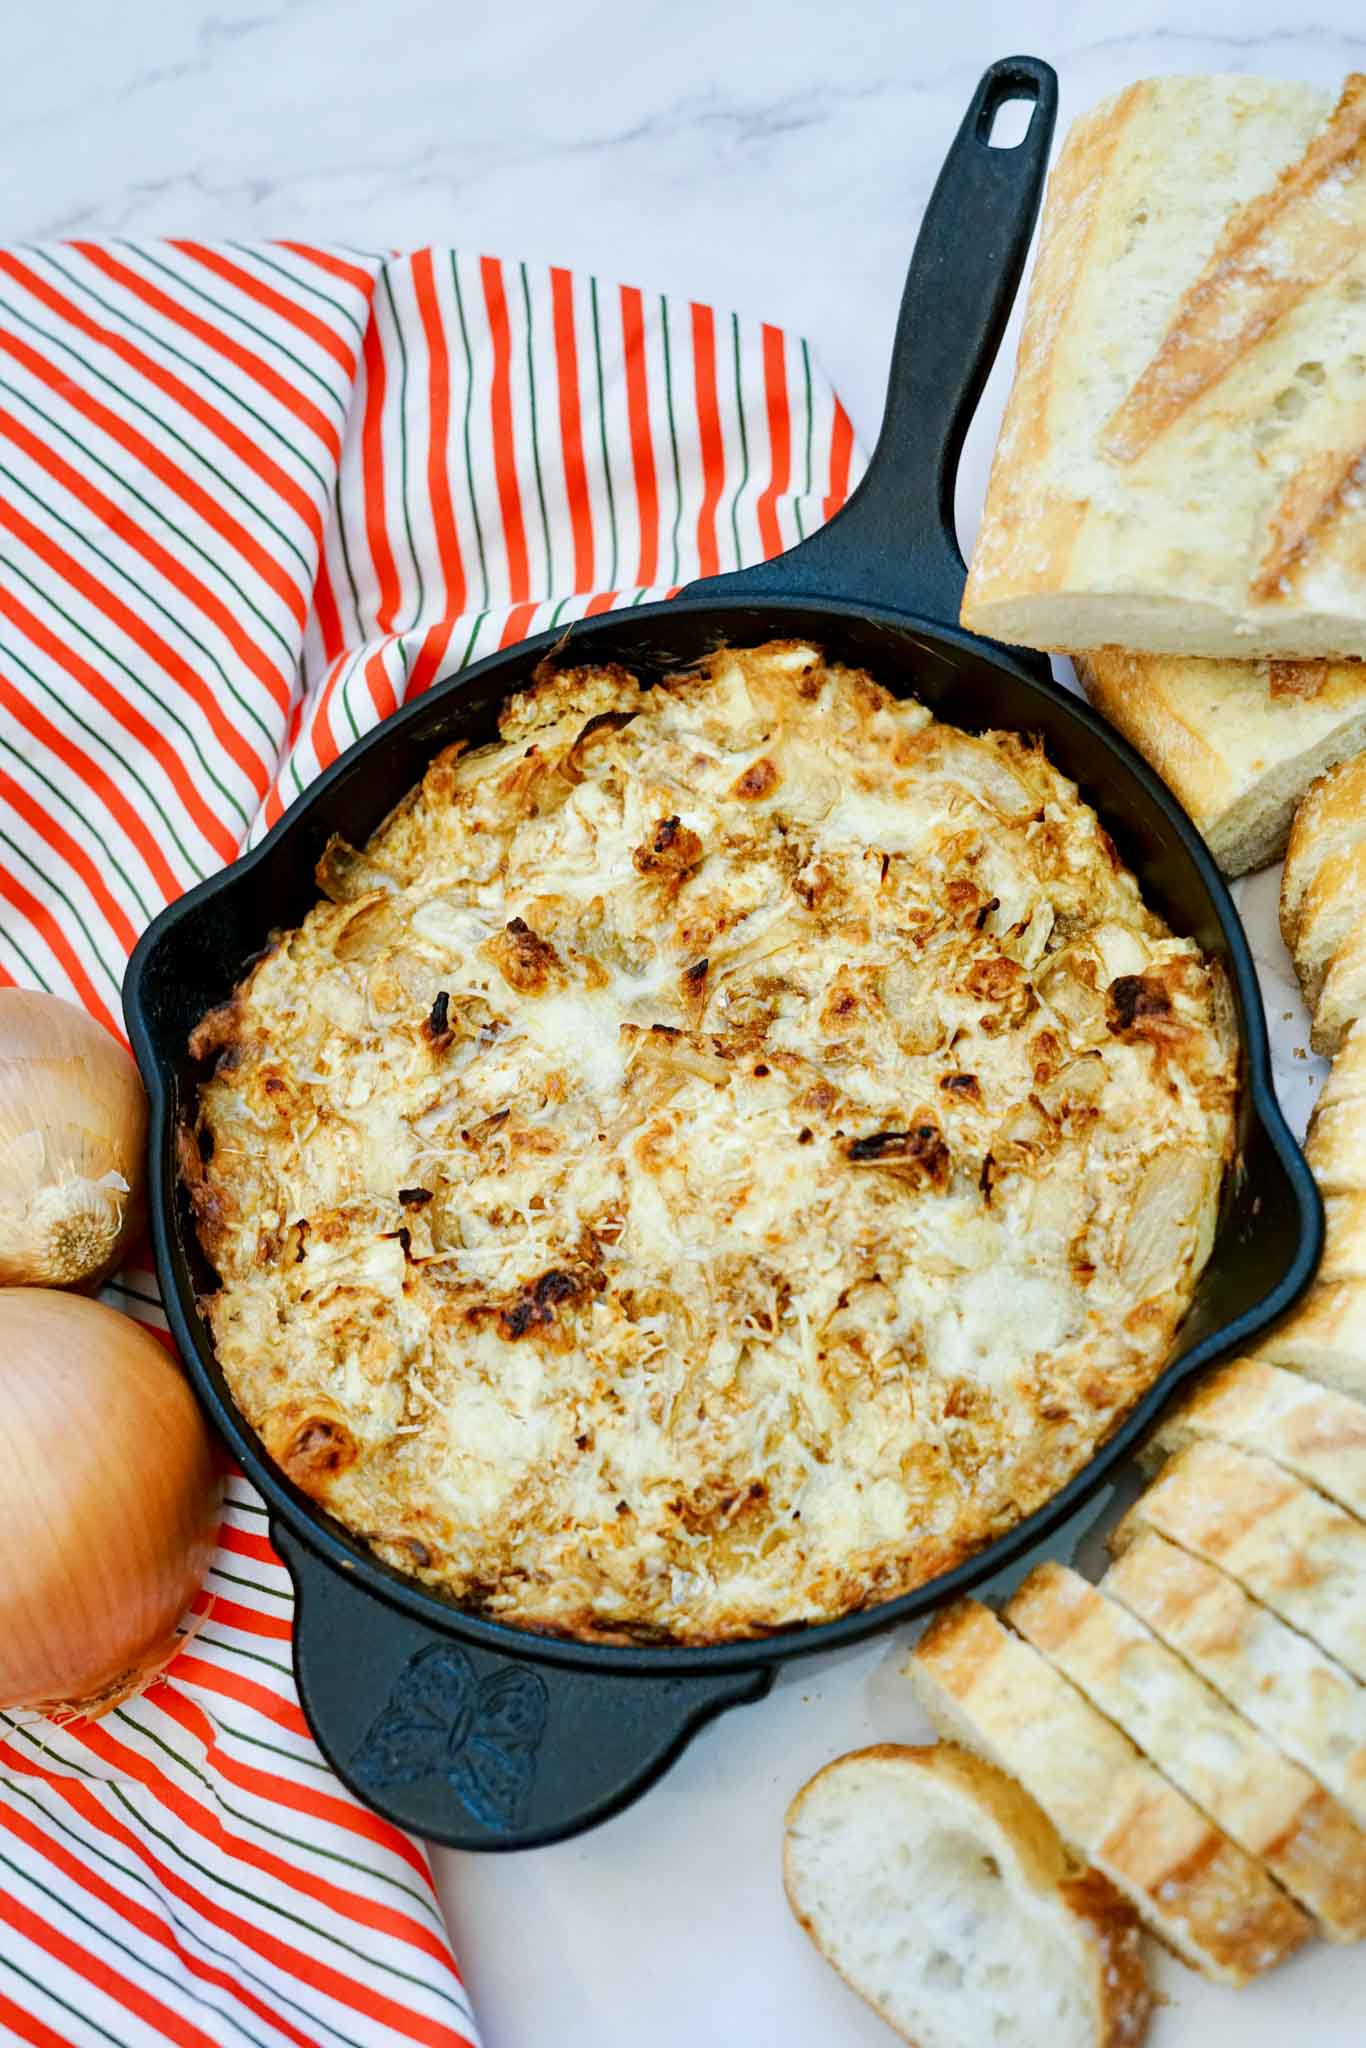 The Most Delicious Oven Baked French Onion Dip